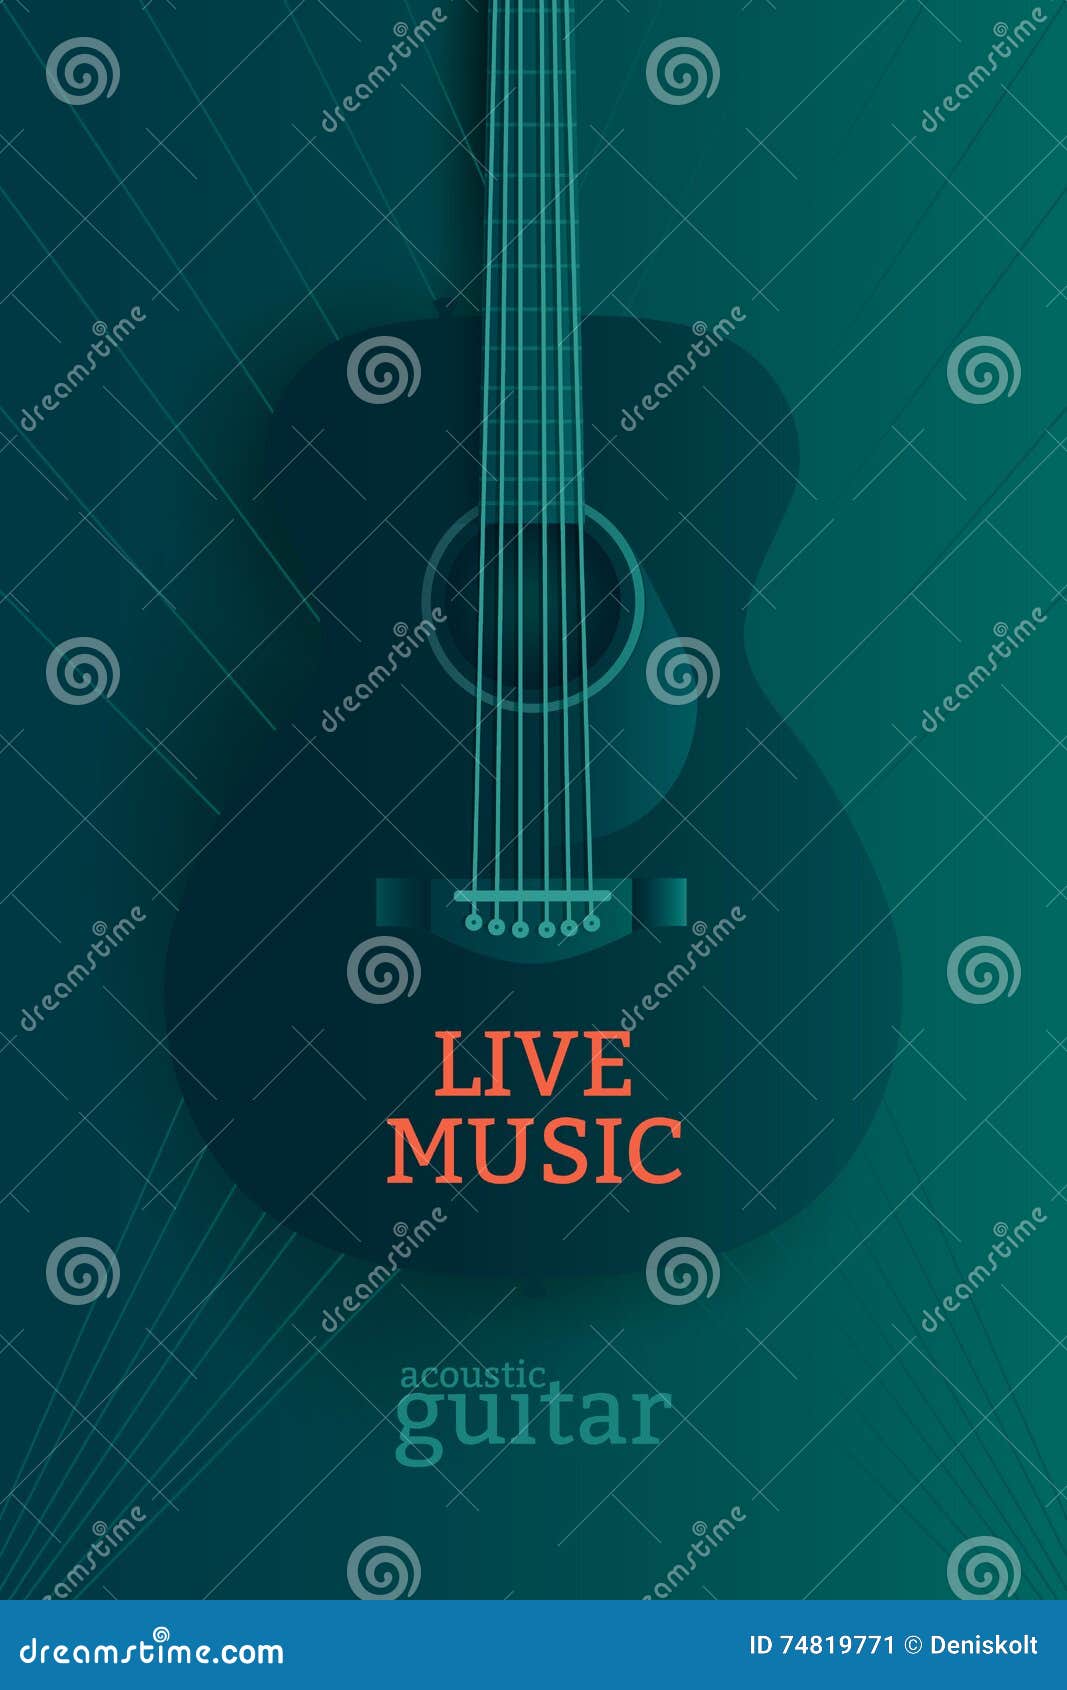 live music poster